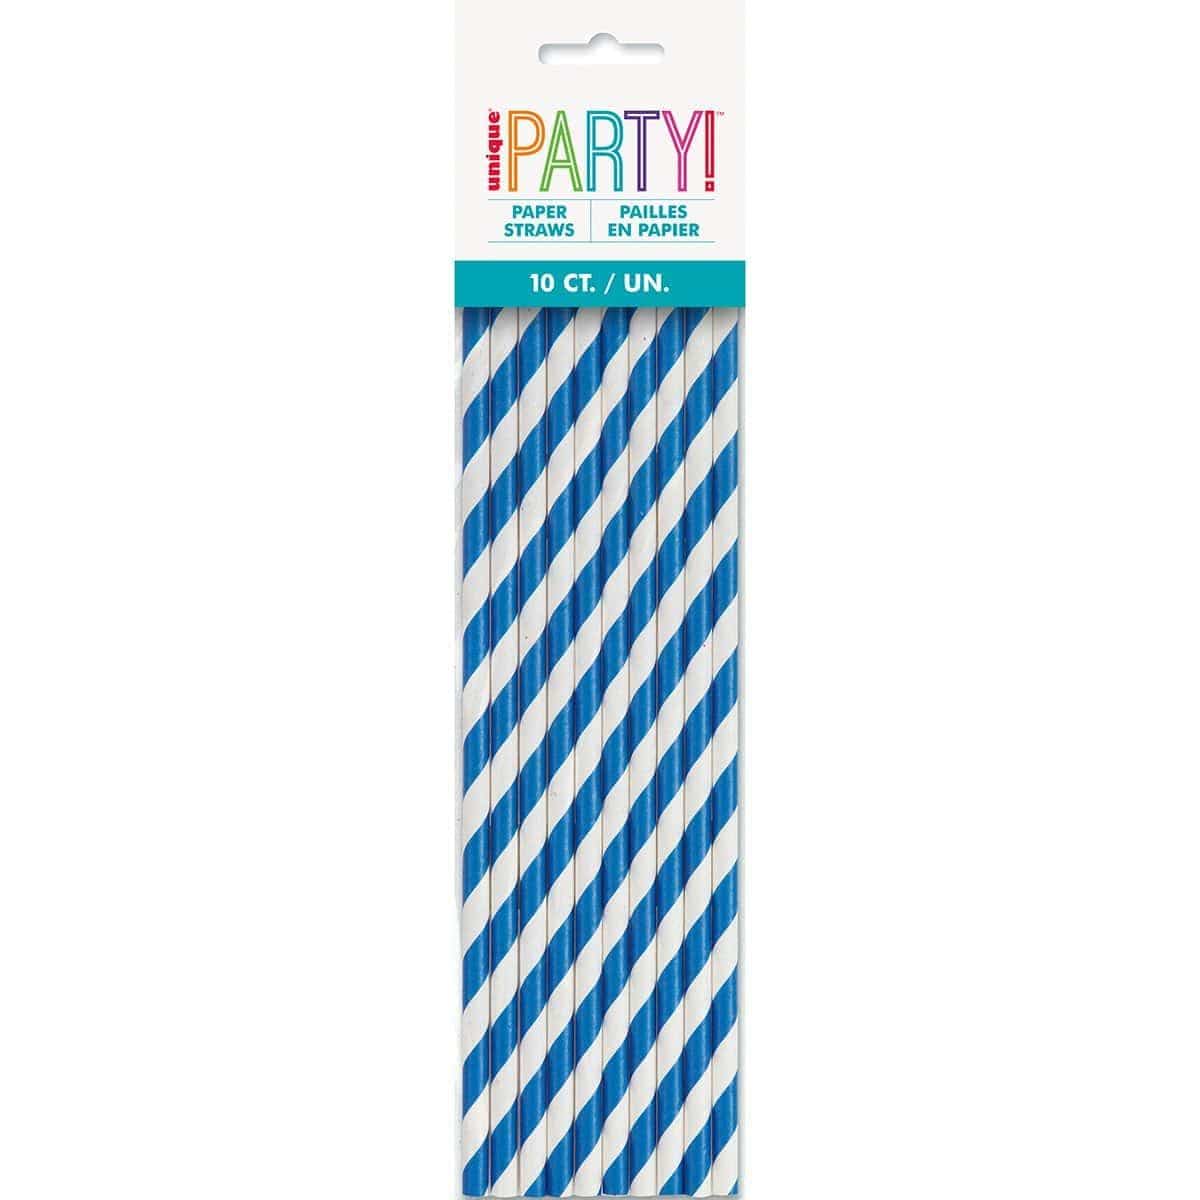 Buy Plasticware Paper Straw With Stripes 10/pkg - Royal Blue sold at Party Expert